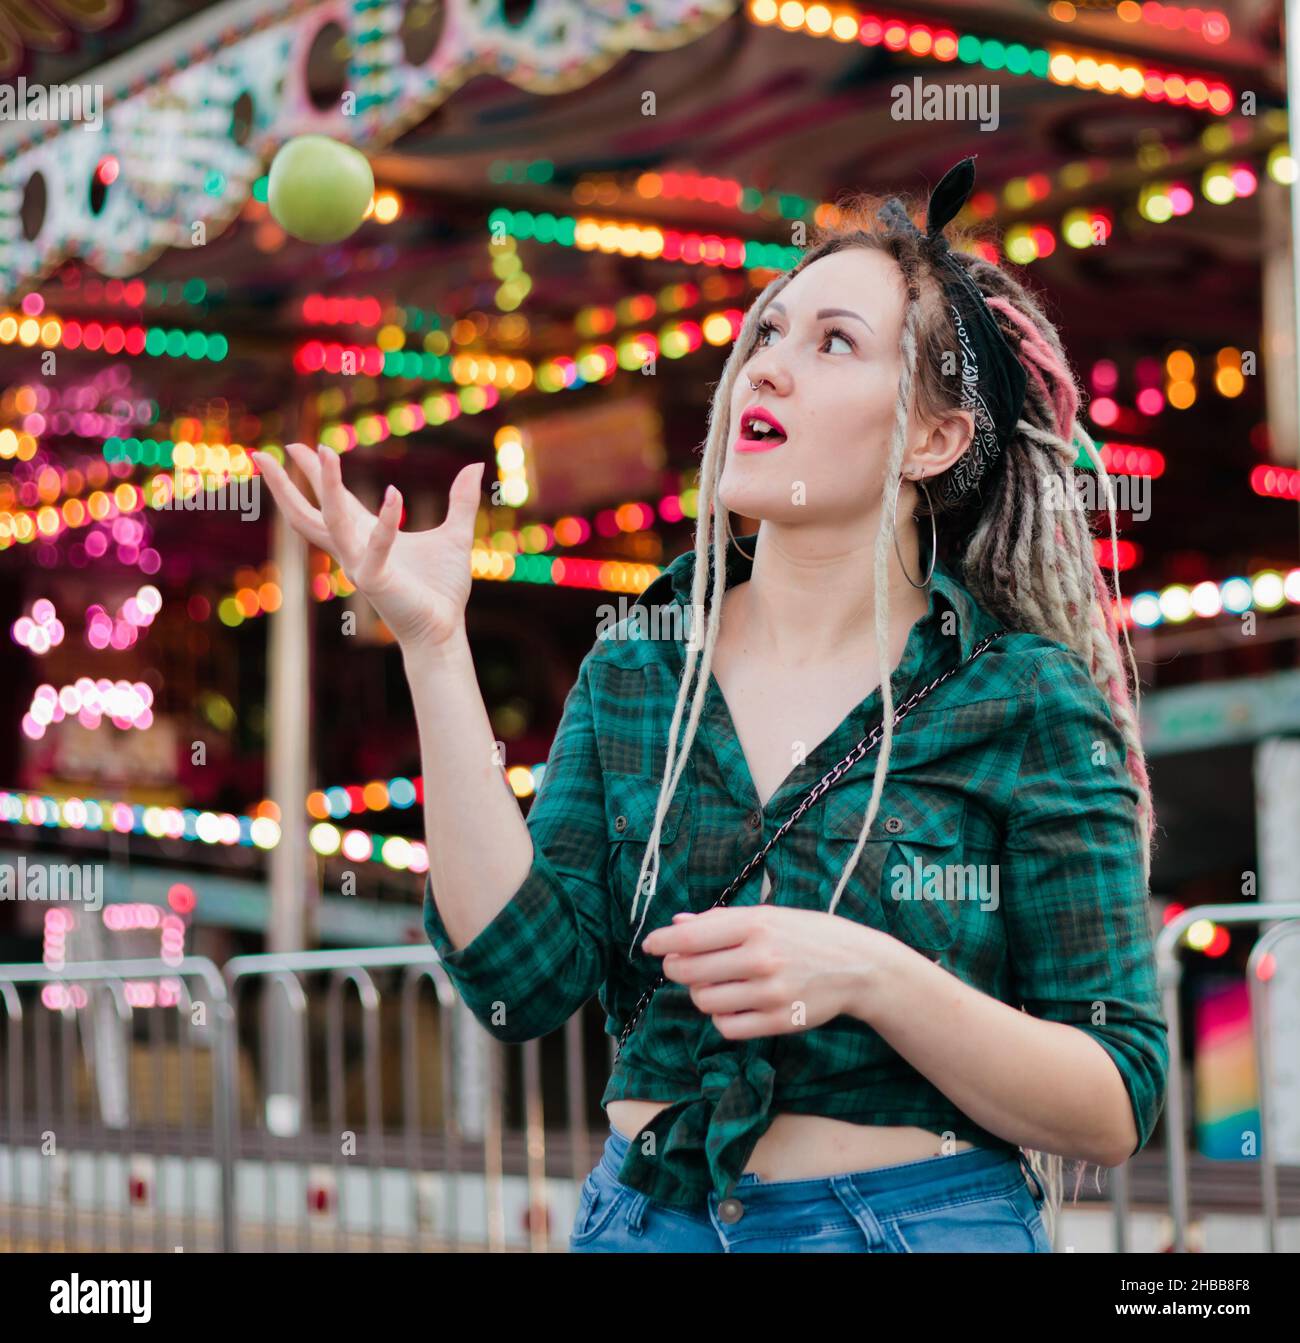 Inordinate young woman with dreadlocks hairstyle and fashionable summer clothes throws apple in amusement park. Stock Photo